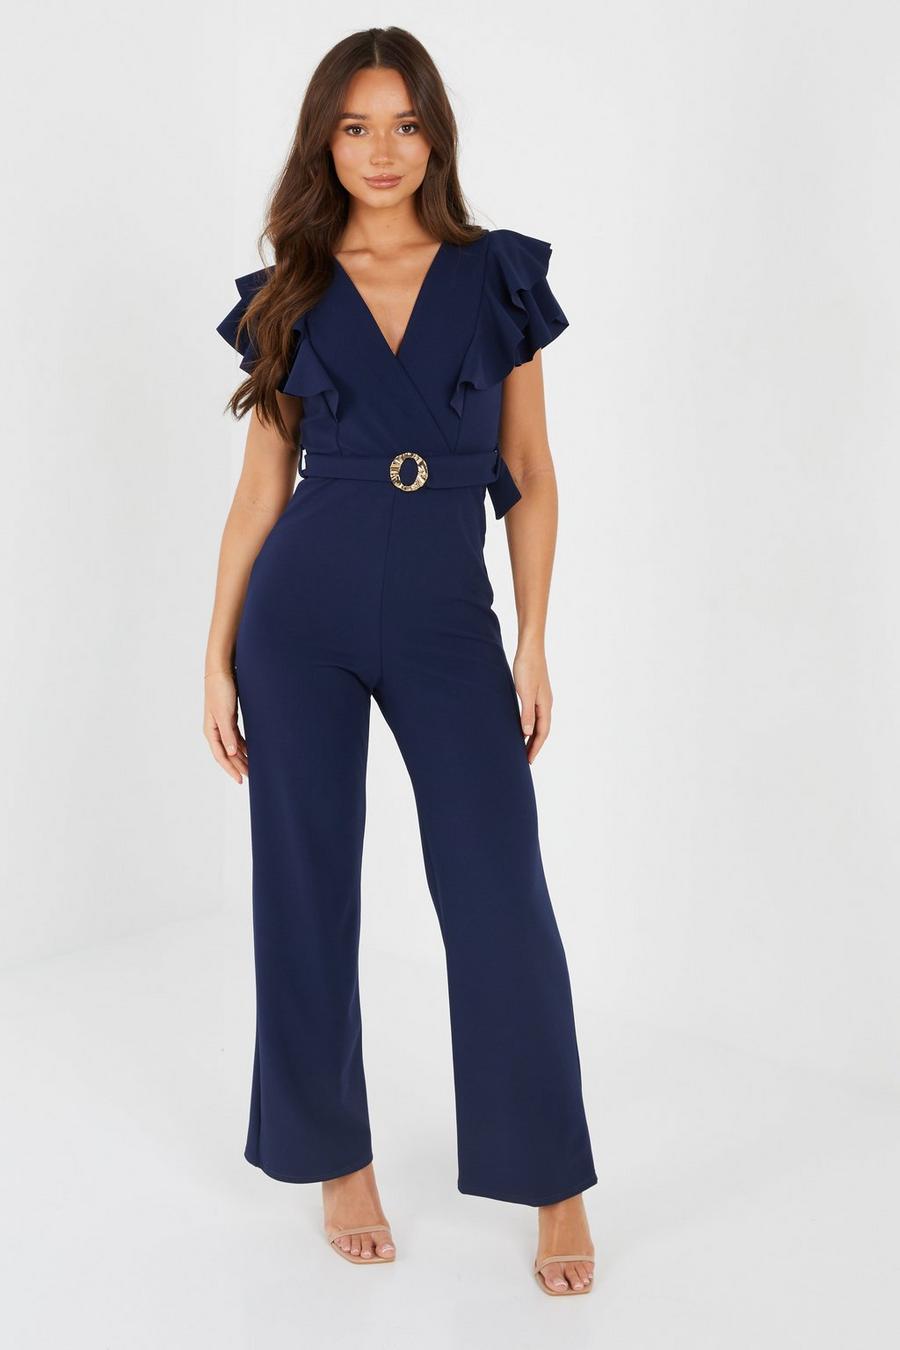 Possible Traditional Addict Navy Frill Sleeve Palazzo Jumpsuit - Quiz Clothing